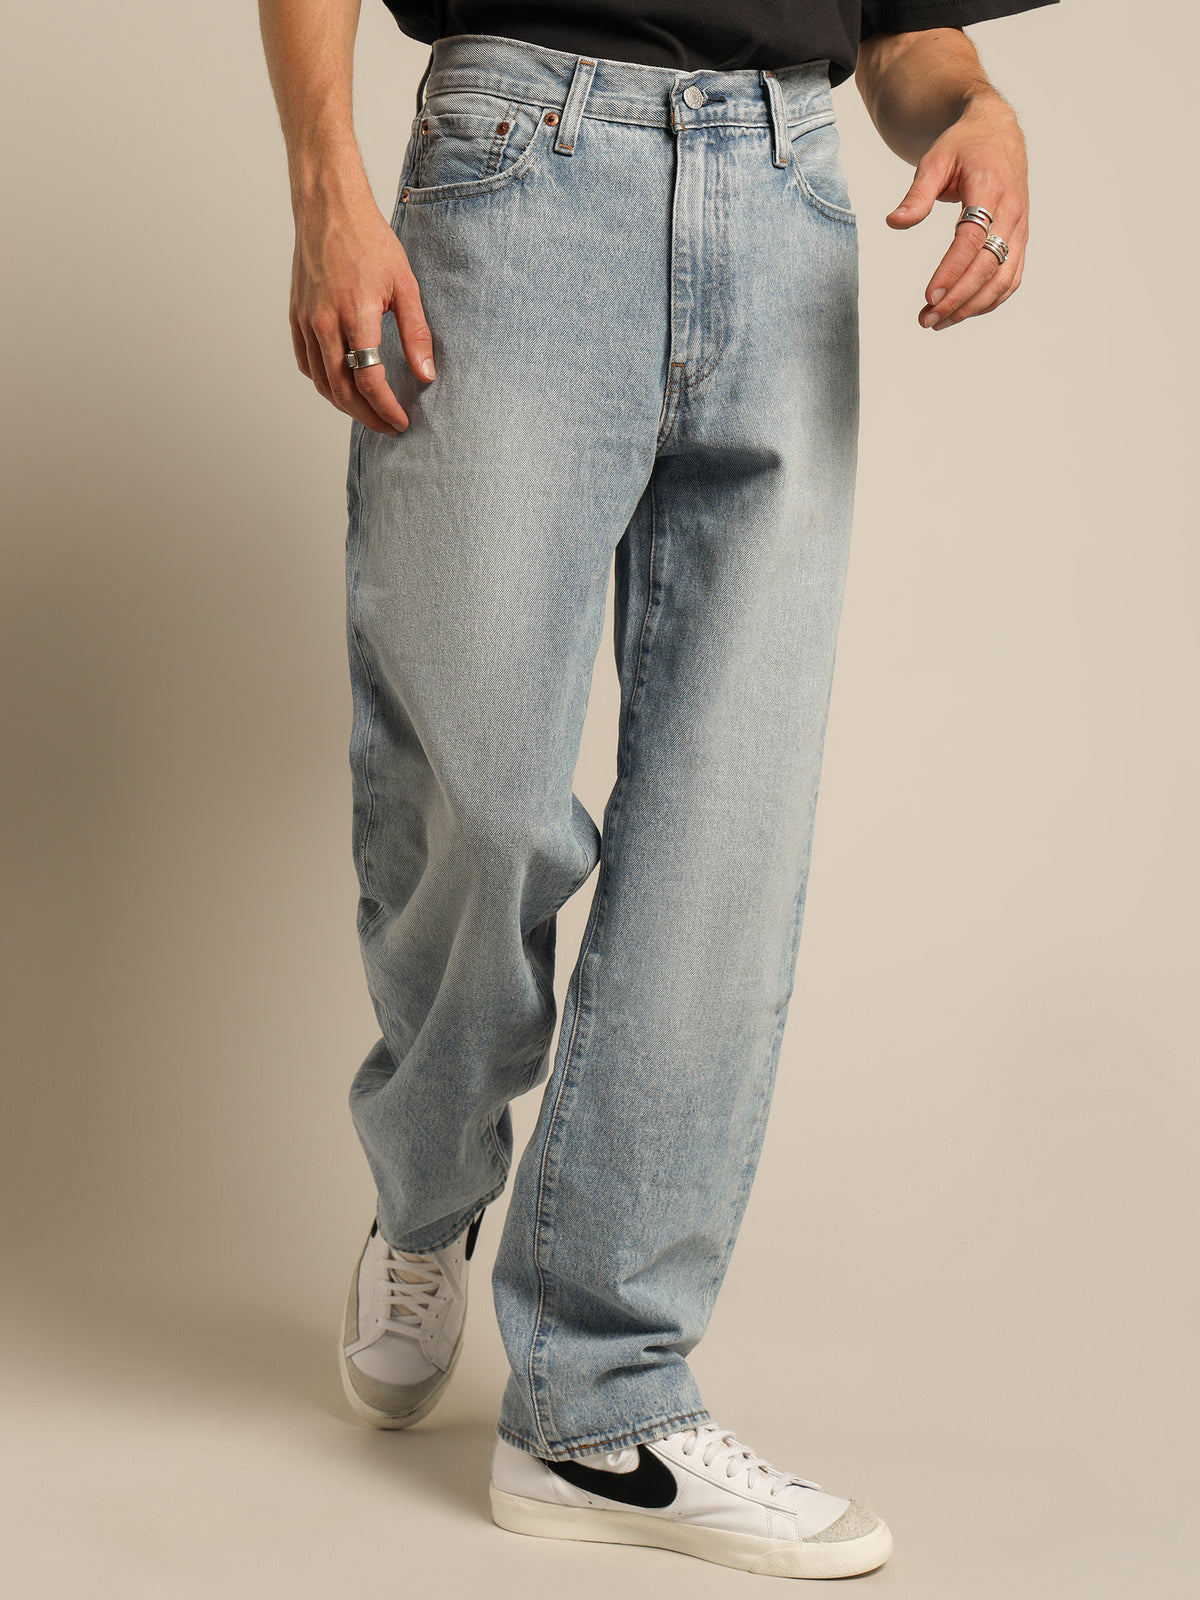 Stay Loose Jeans in Light Blue